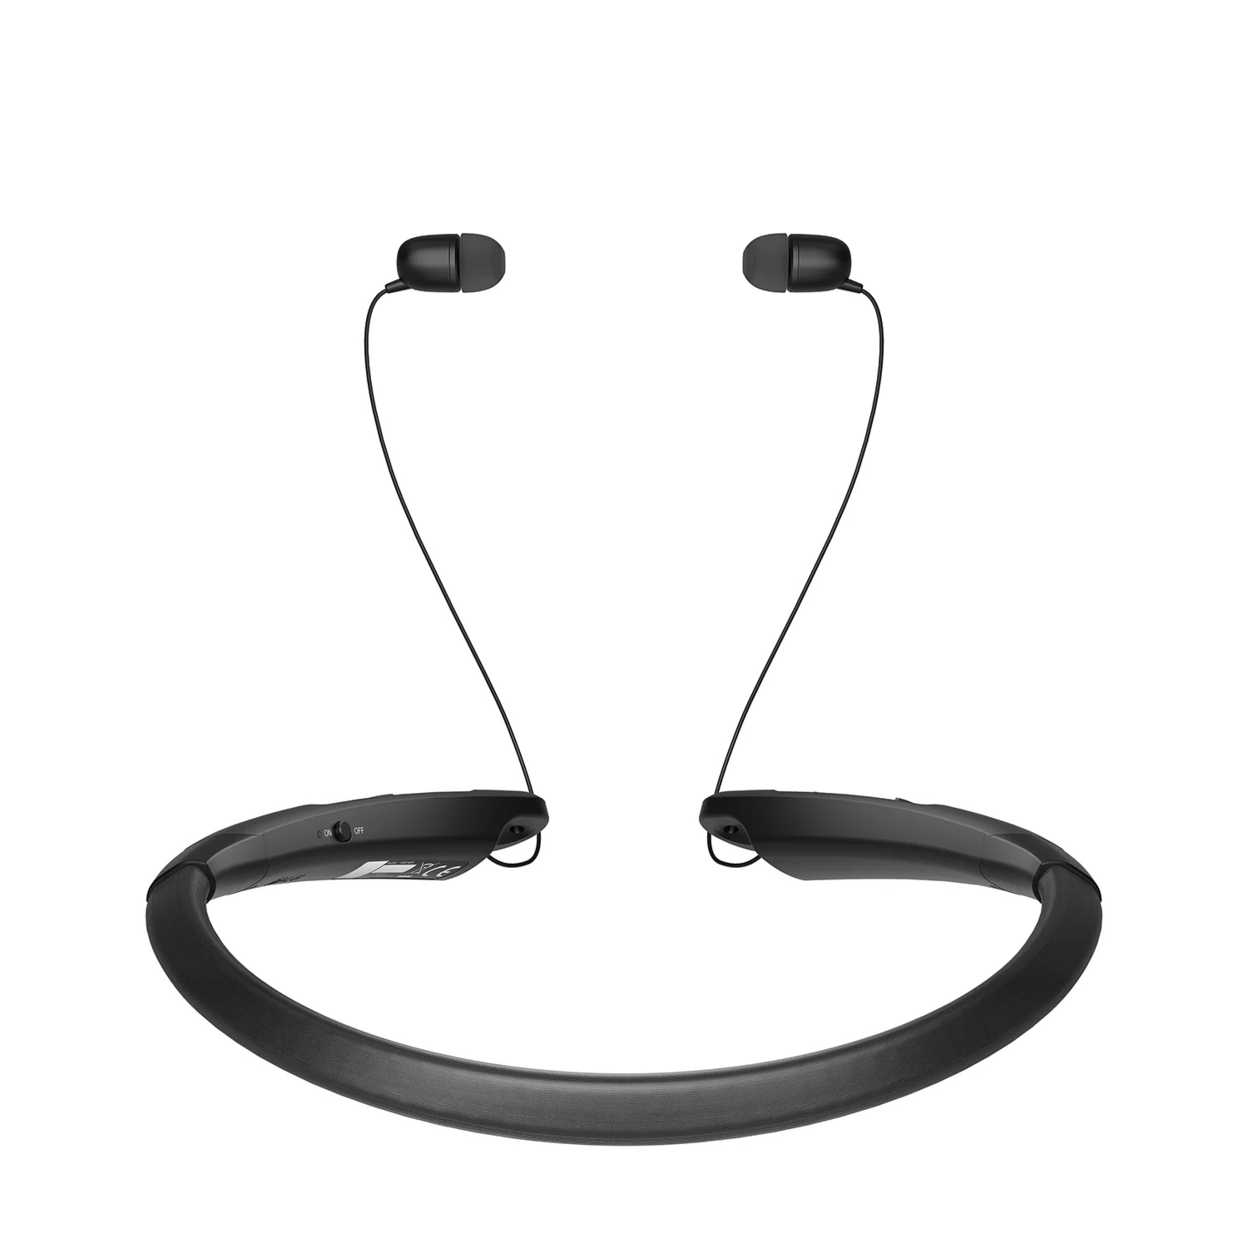 LG TONE NP3C Wireless Stereo Headset With Retractable Earbuds